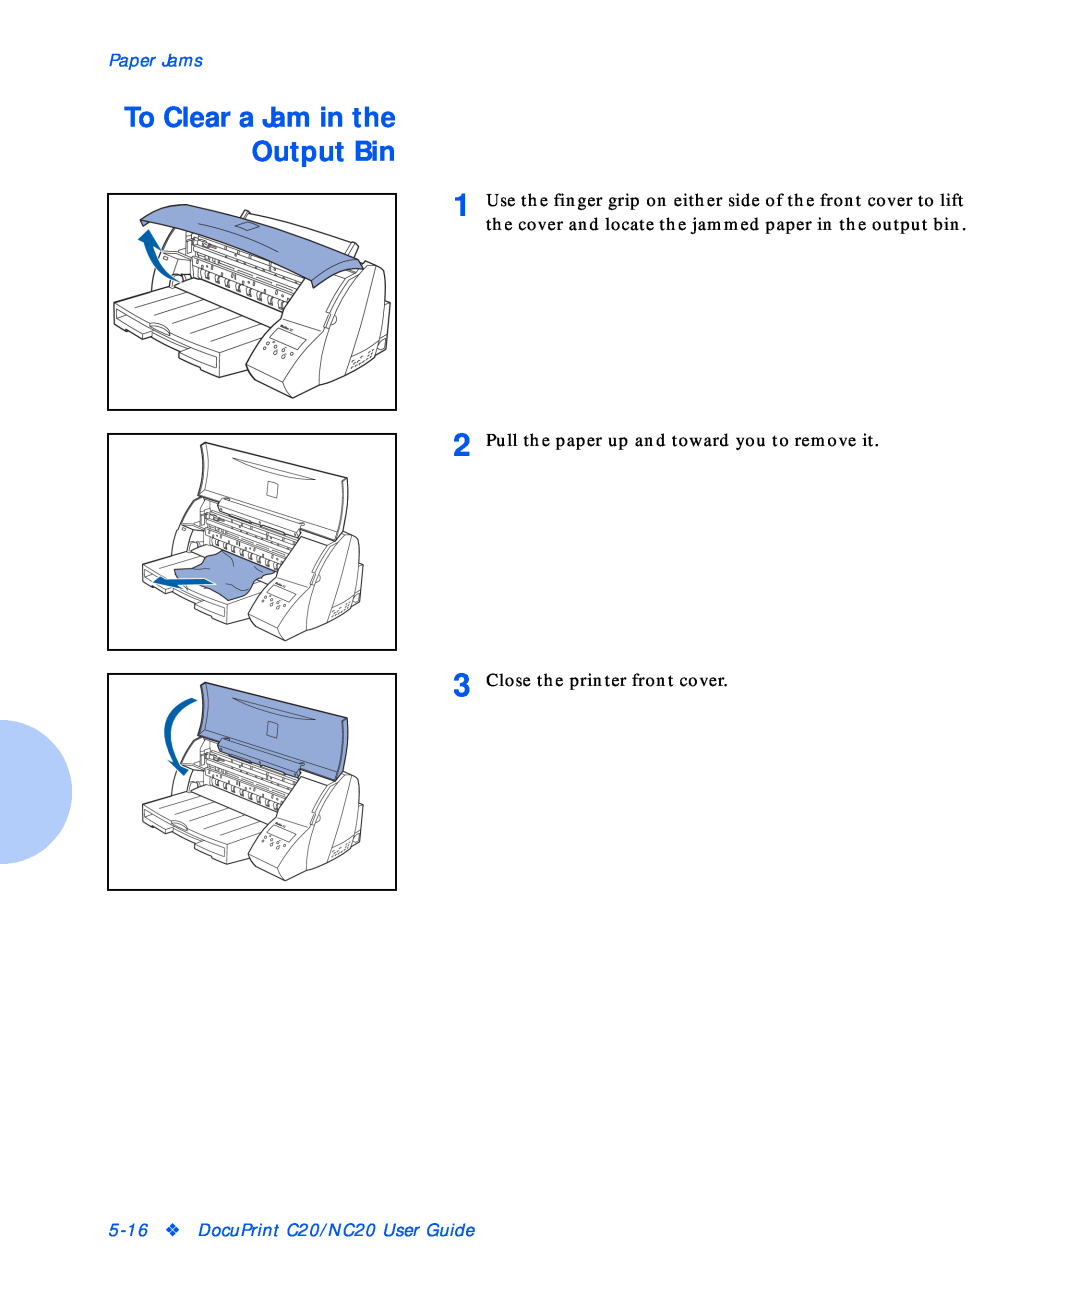 Xerox manual To Clear a Jam in the Output Bin, Paper Jams, DocuPrint C20/NC20 User Guide 